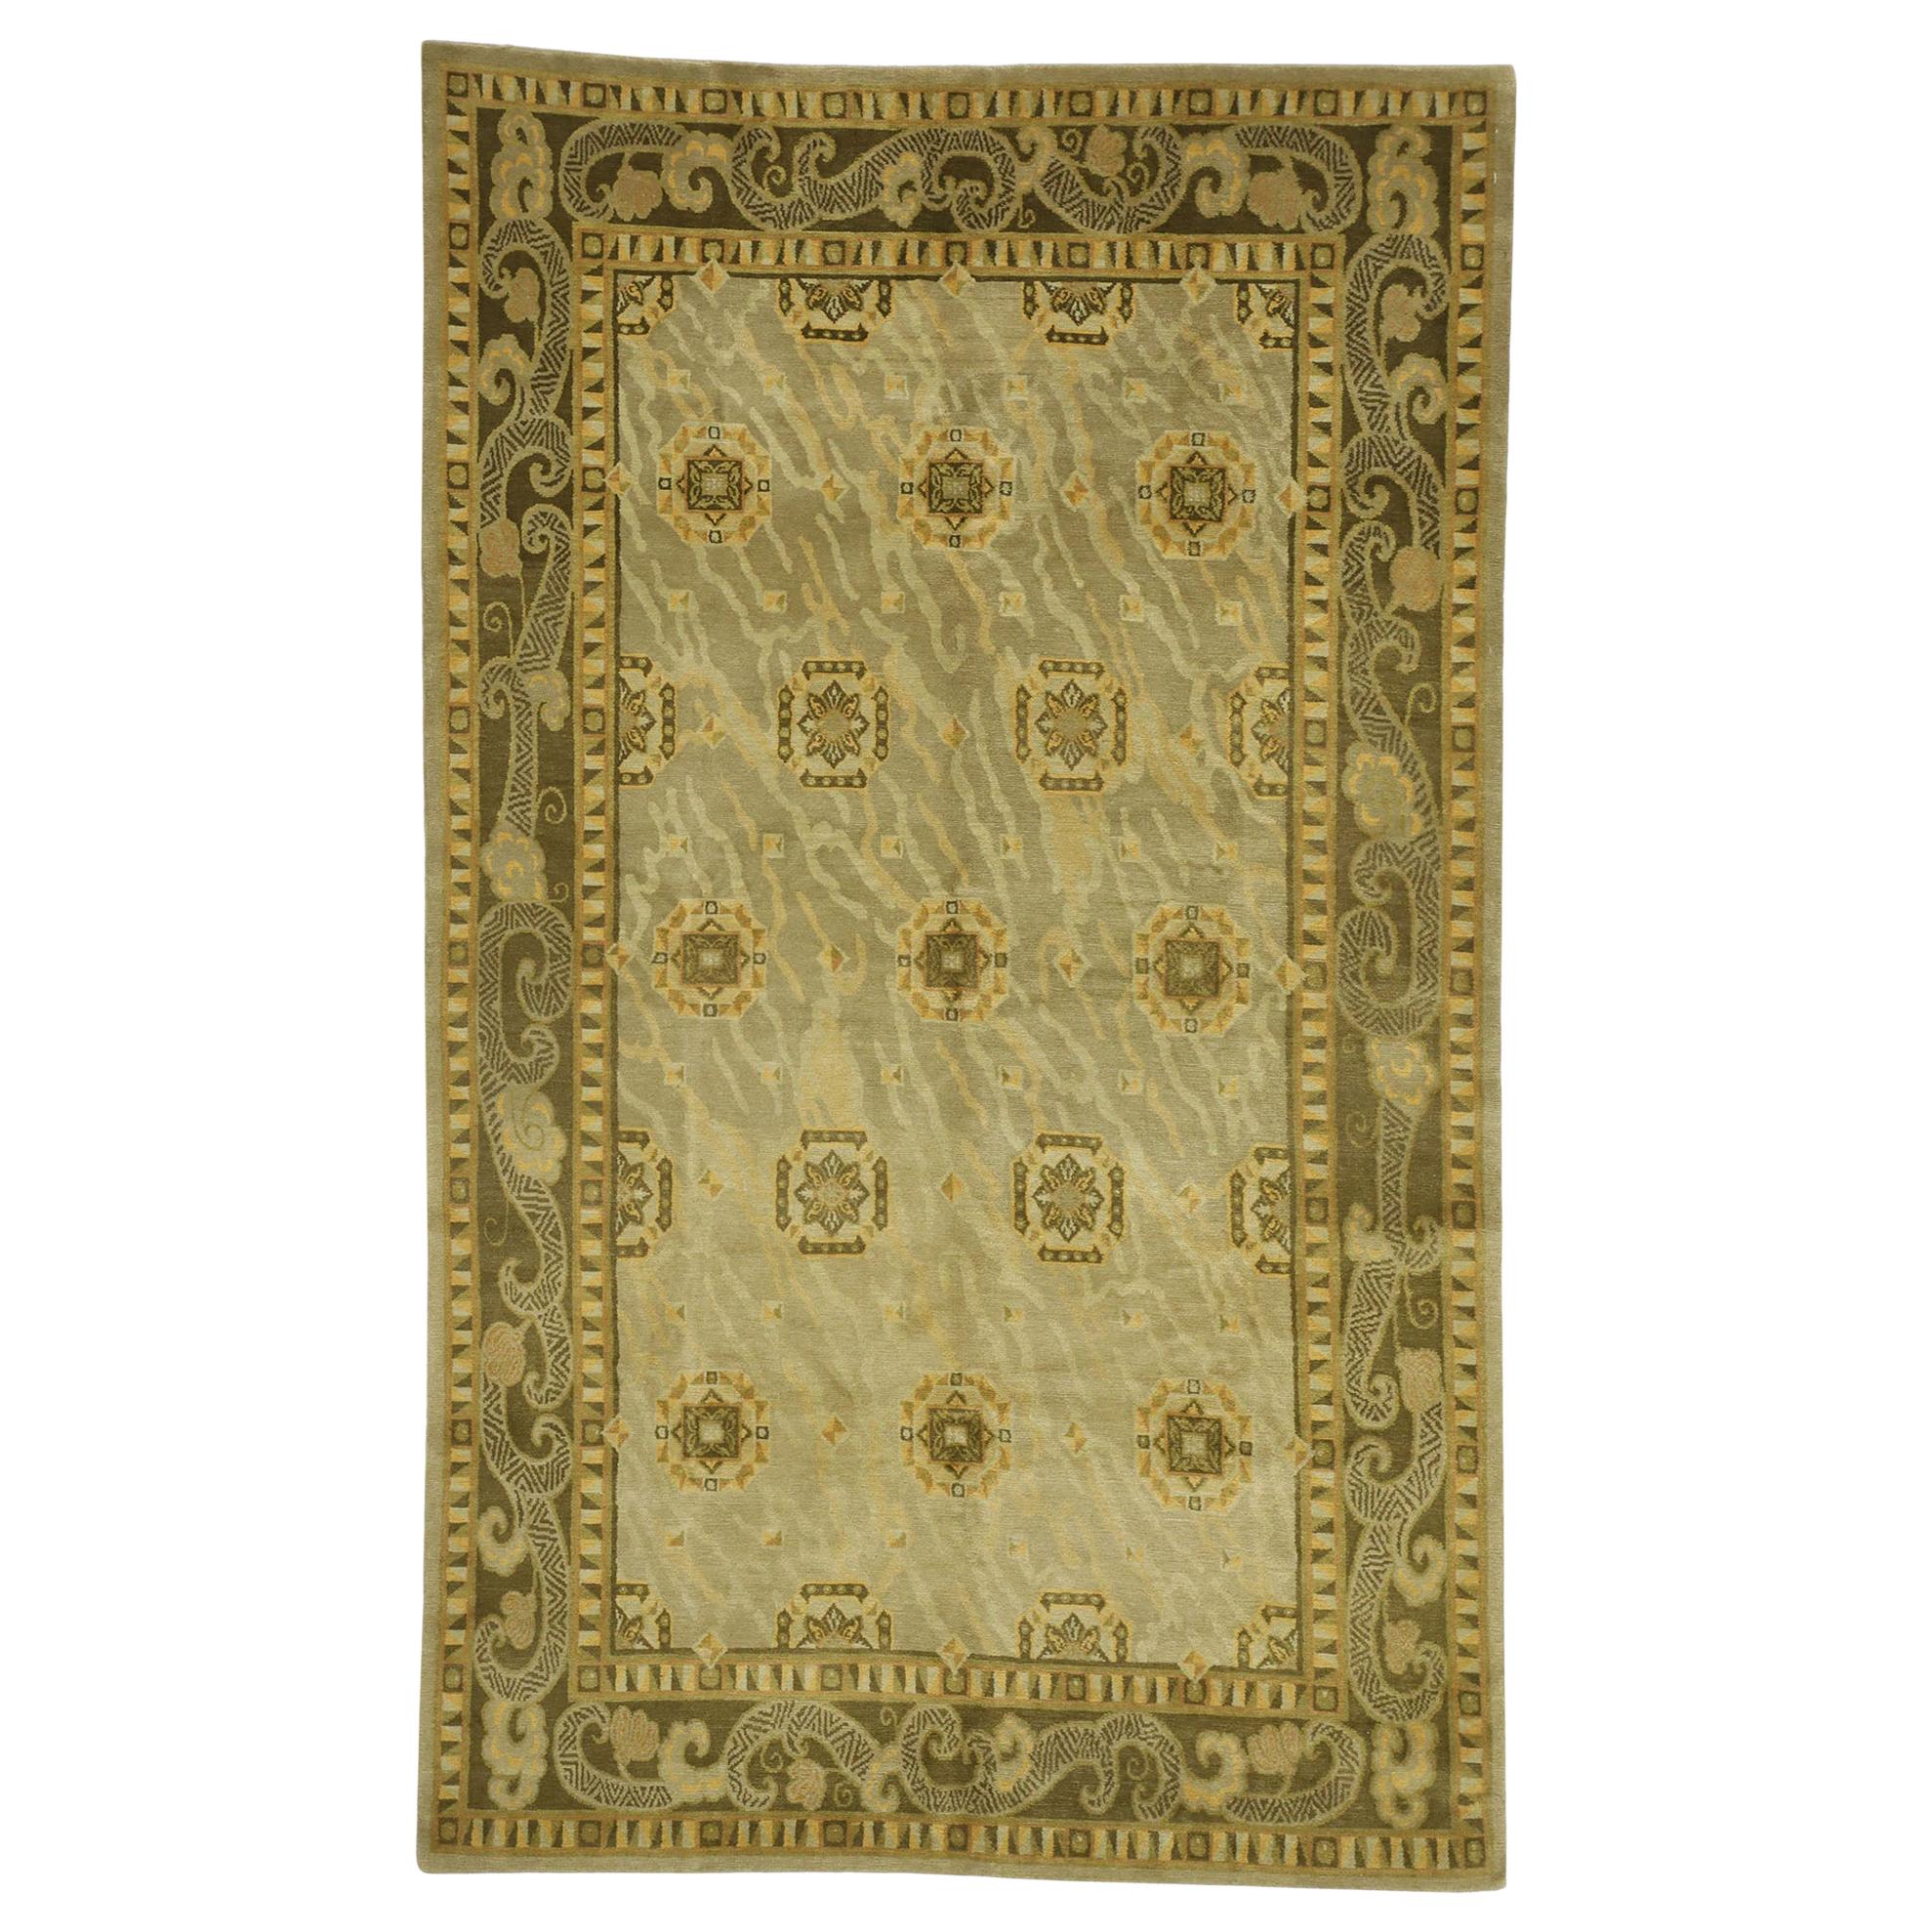 Vintage Tibetan Area Rug with Chinese Art Deco Style 